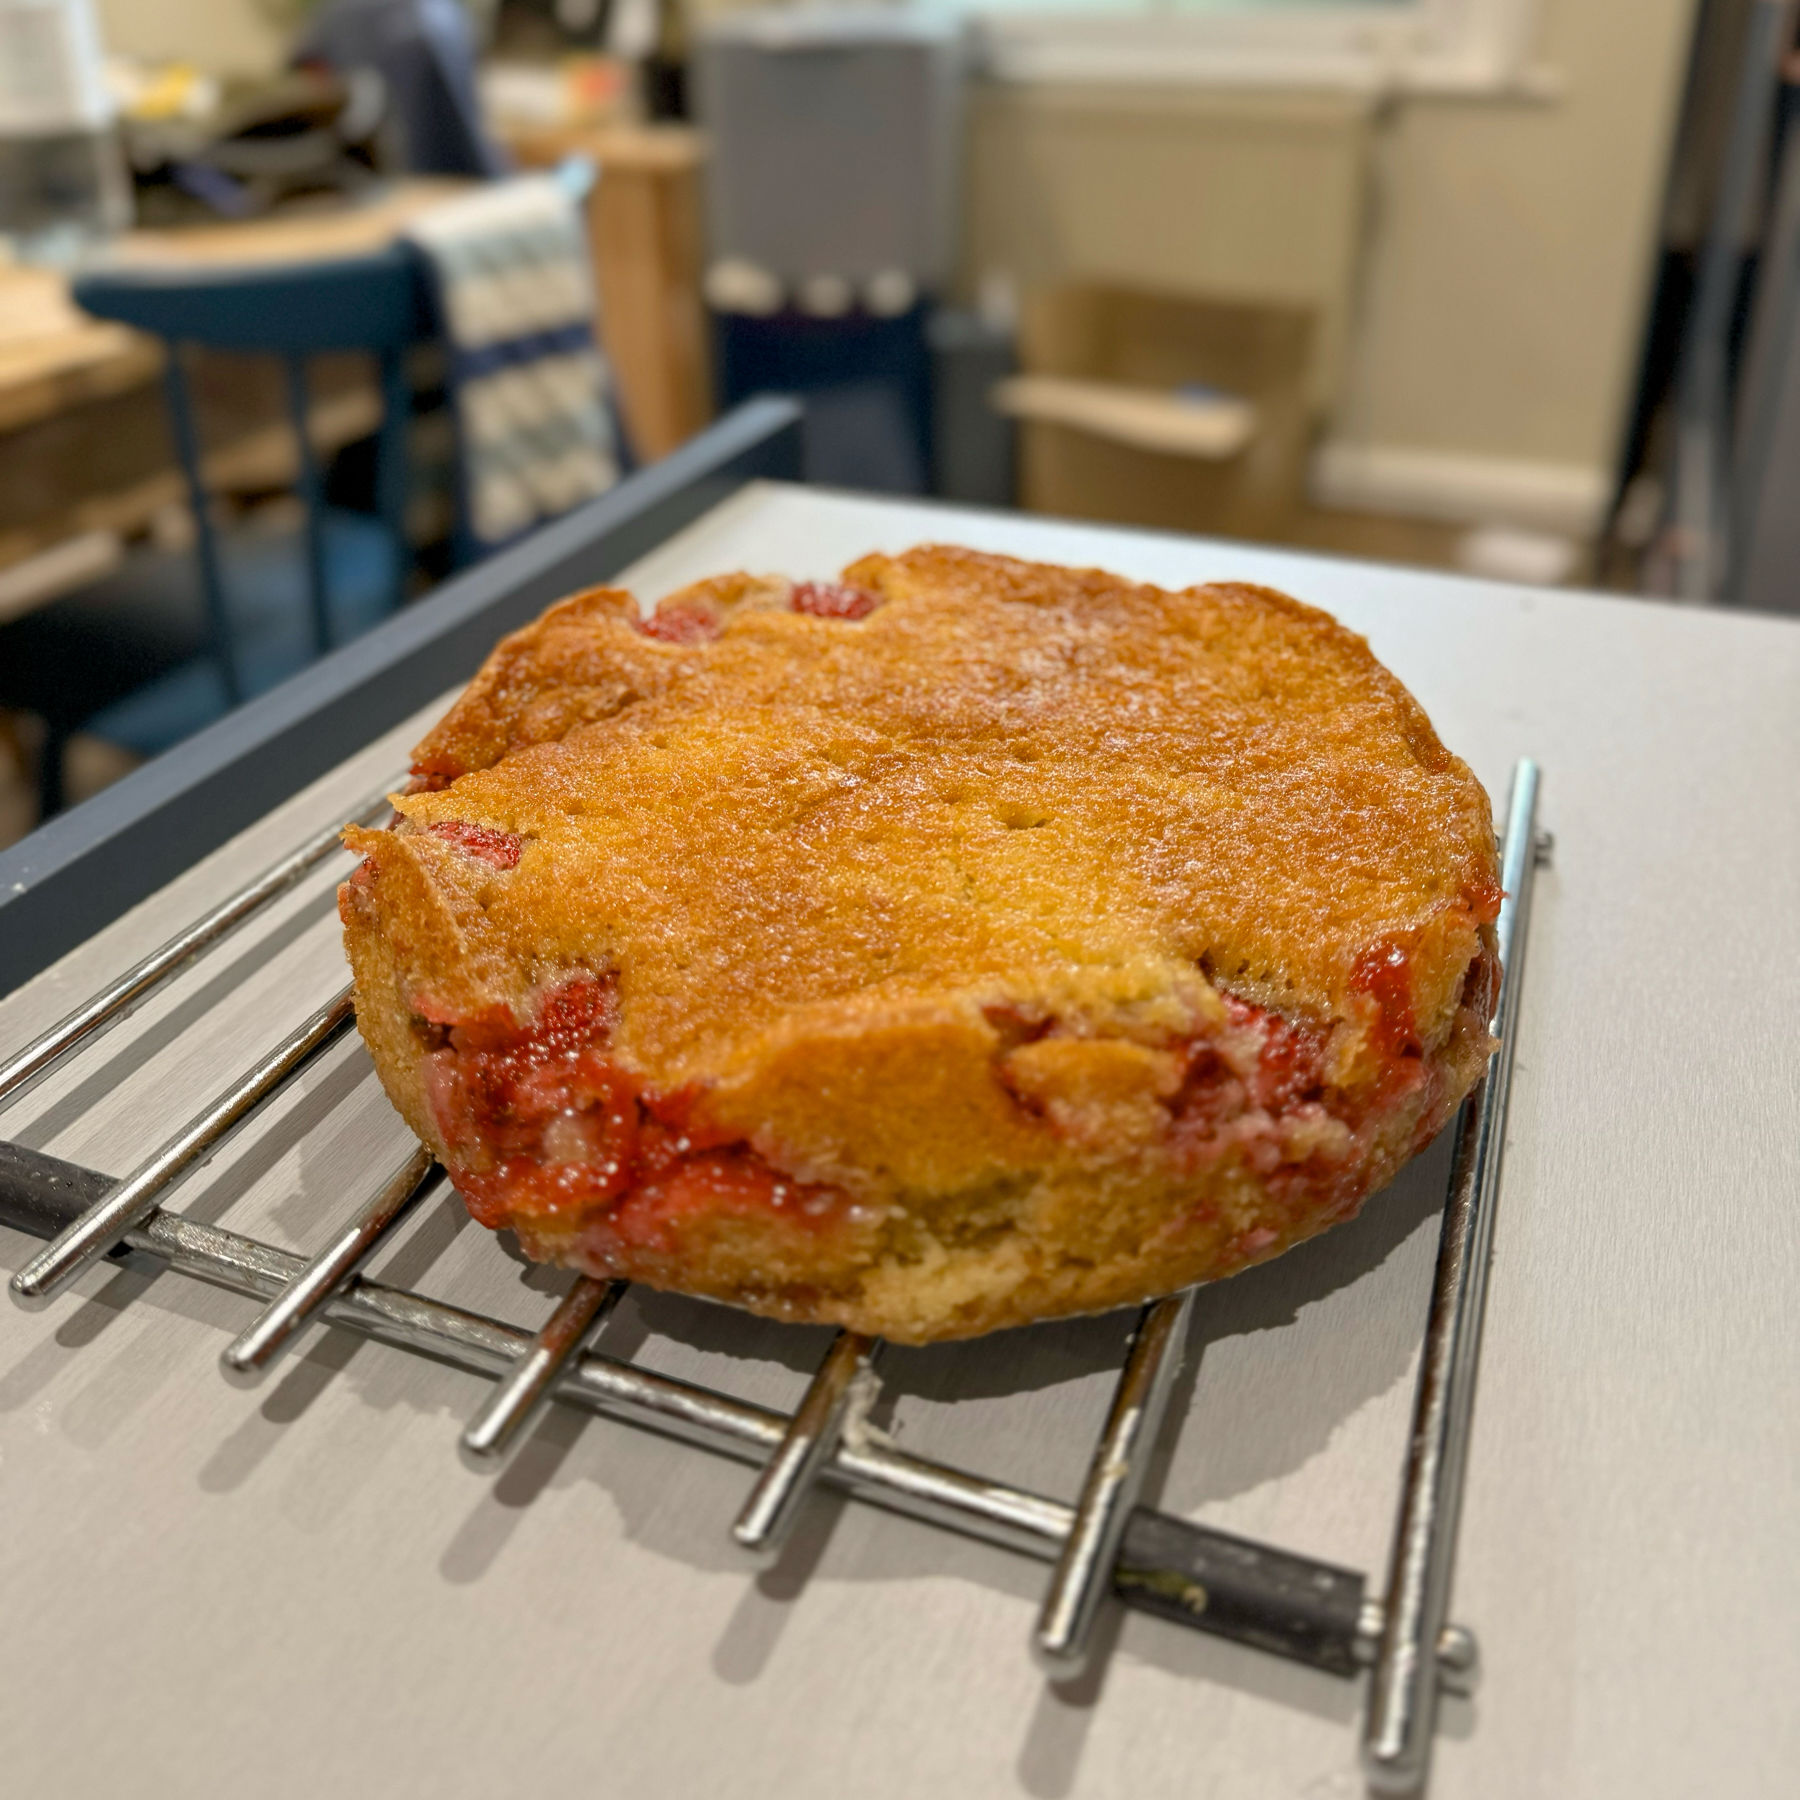 A cake with strawberries peeking through in a cooked jammy state on a cooling rack overlooking a modern kitchen setting.